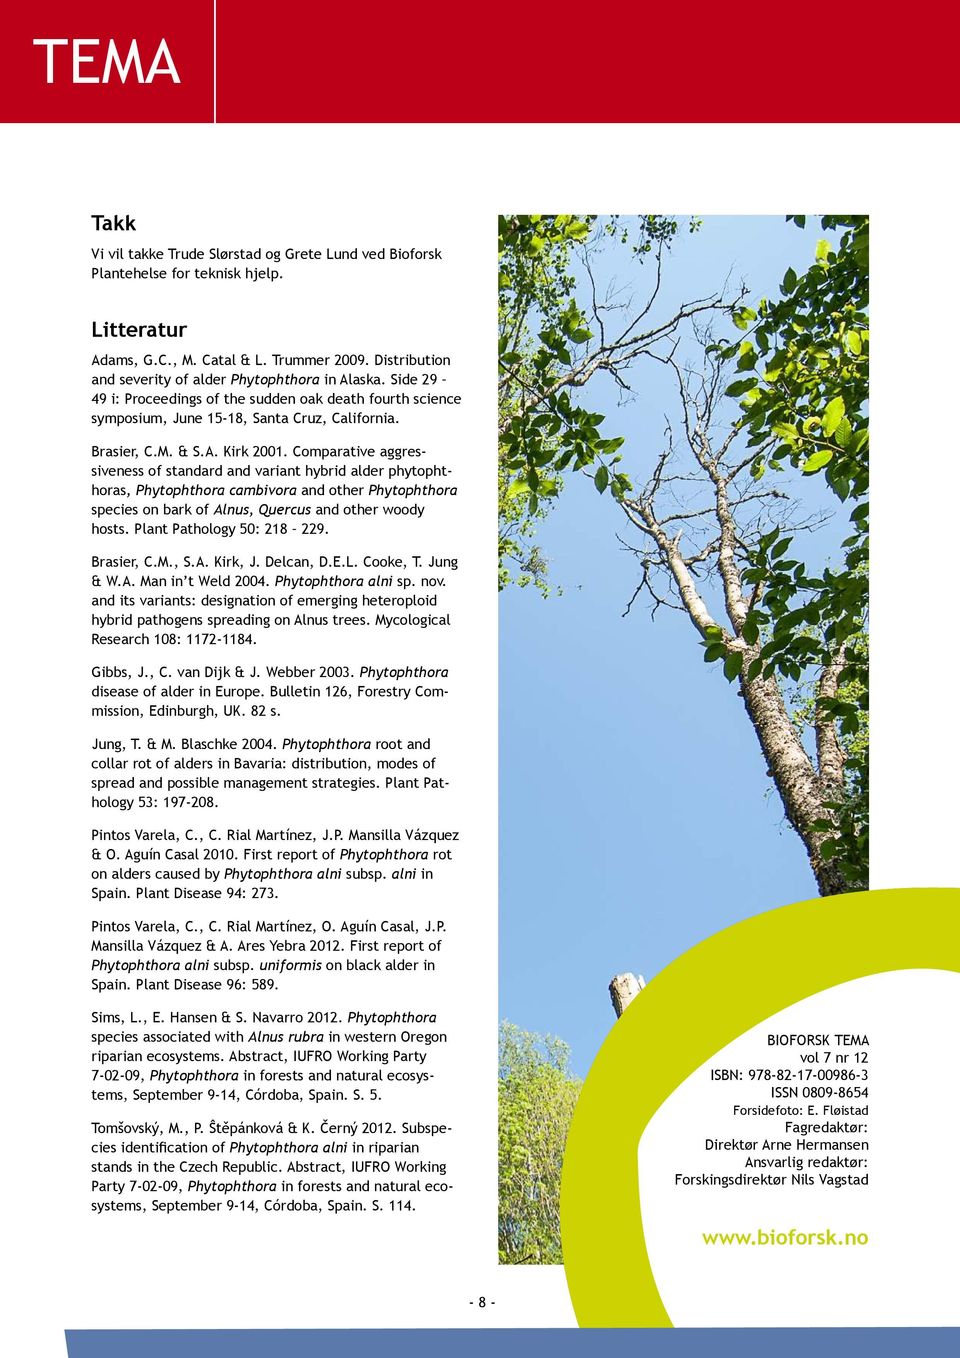 Comparative aggressiveness of standard and variant hybrid alder phytophthoras, Phytophthora cambivora and other Phytophthora species on bark of Alnus, Quercus and other woody hosts.